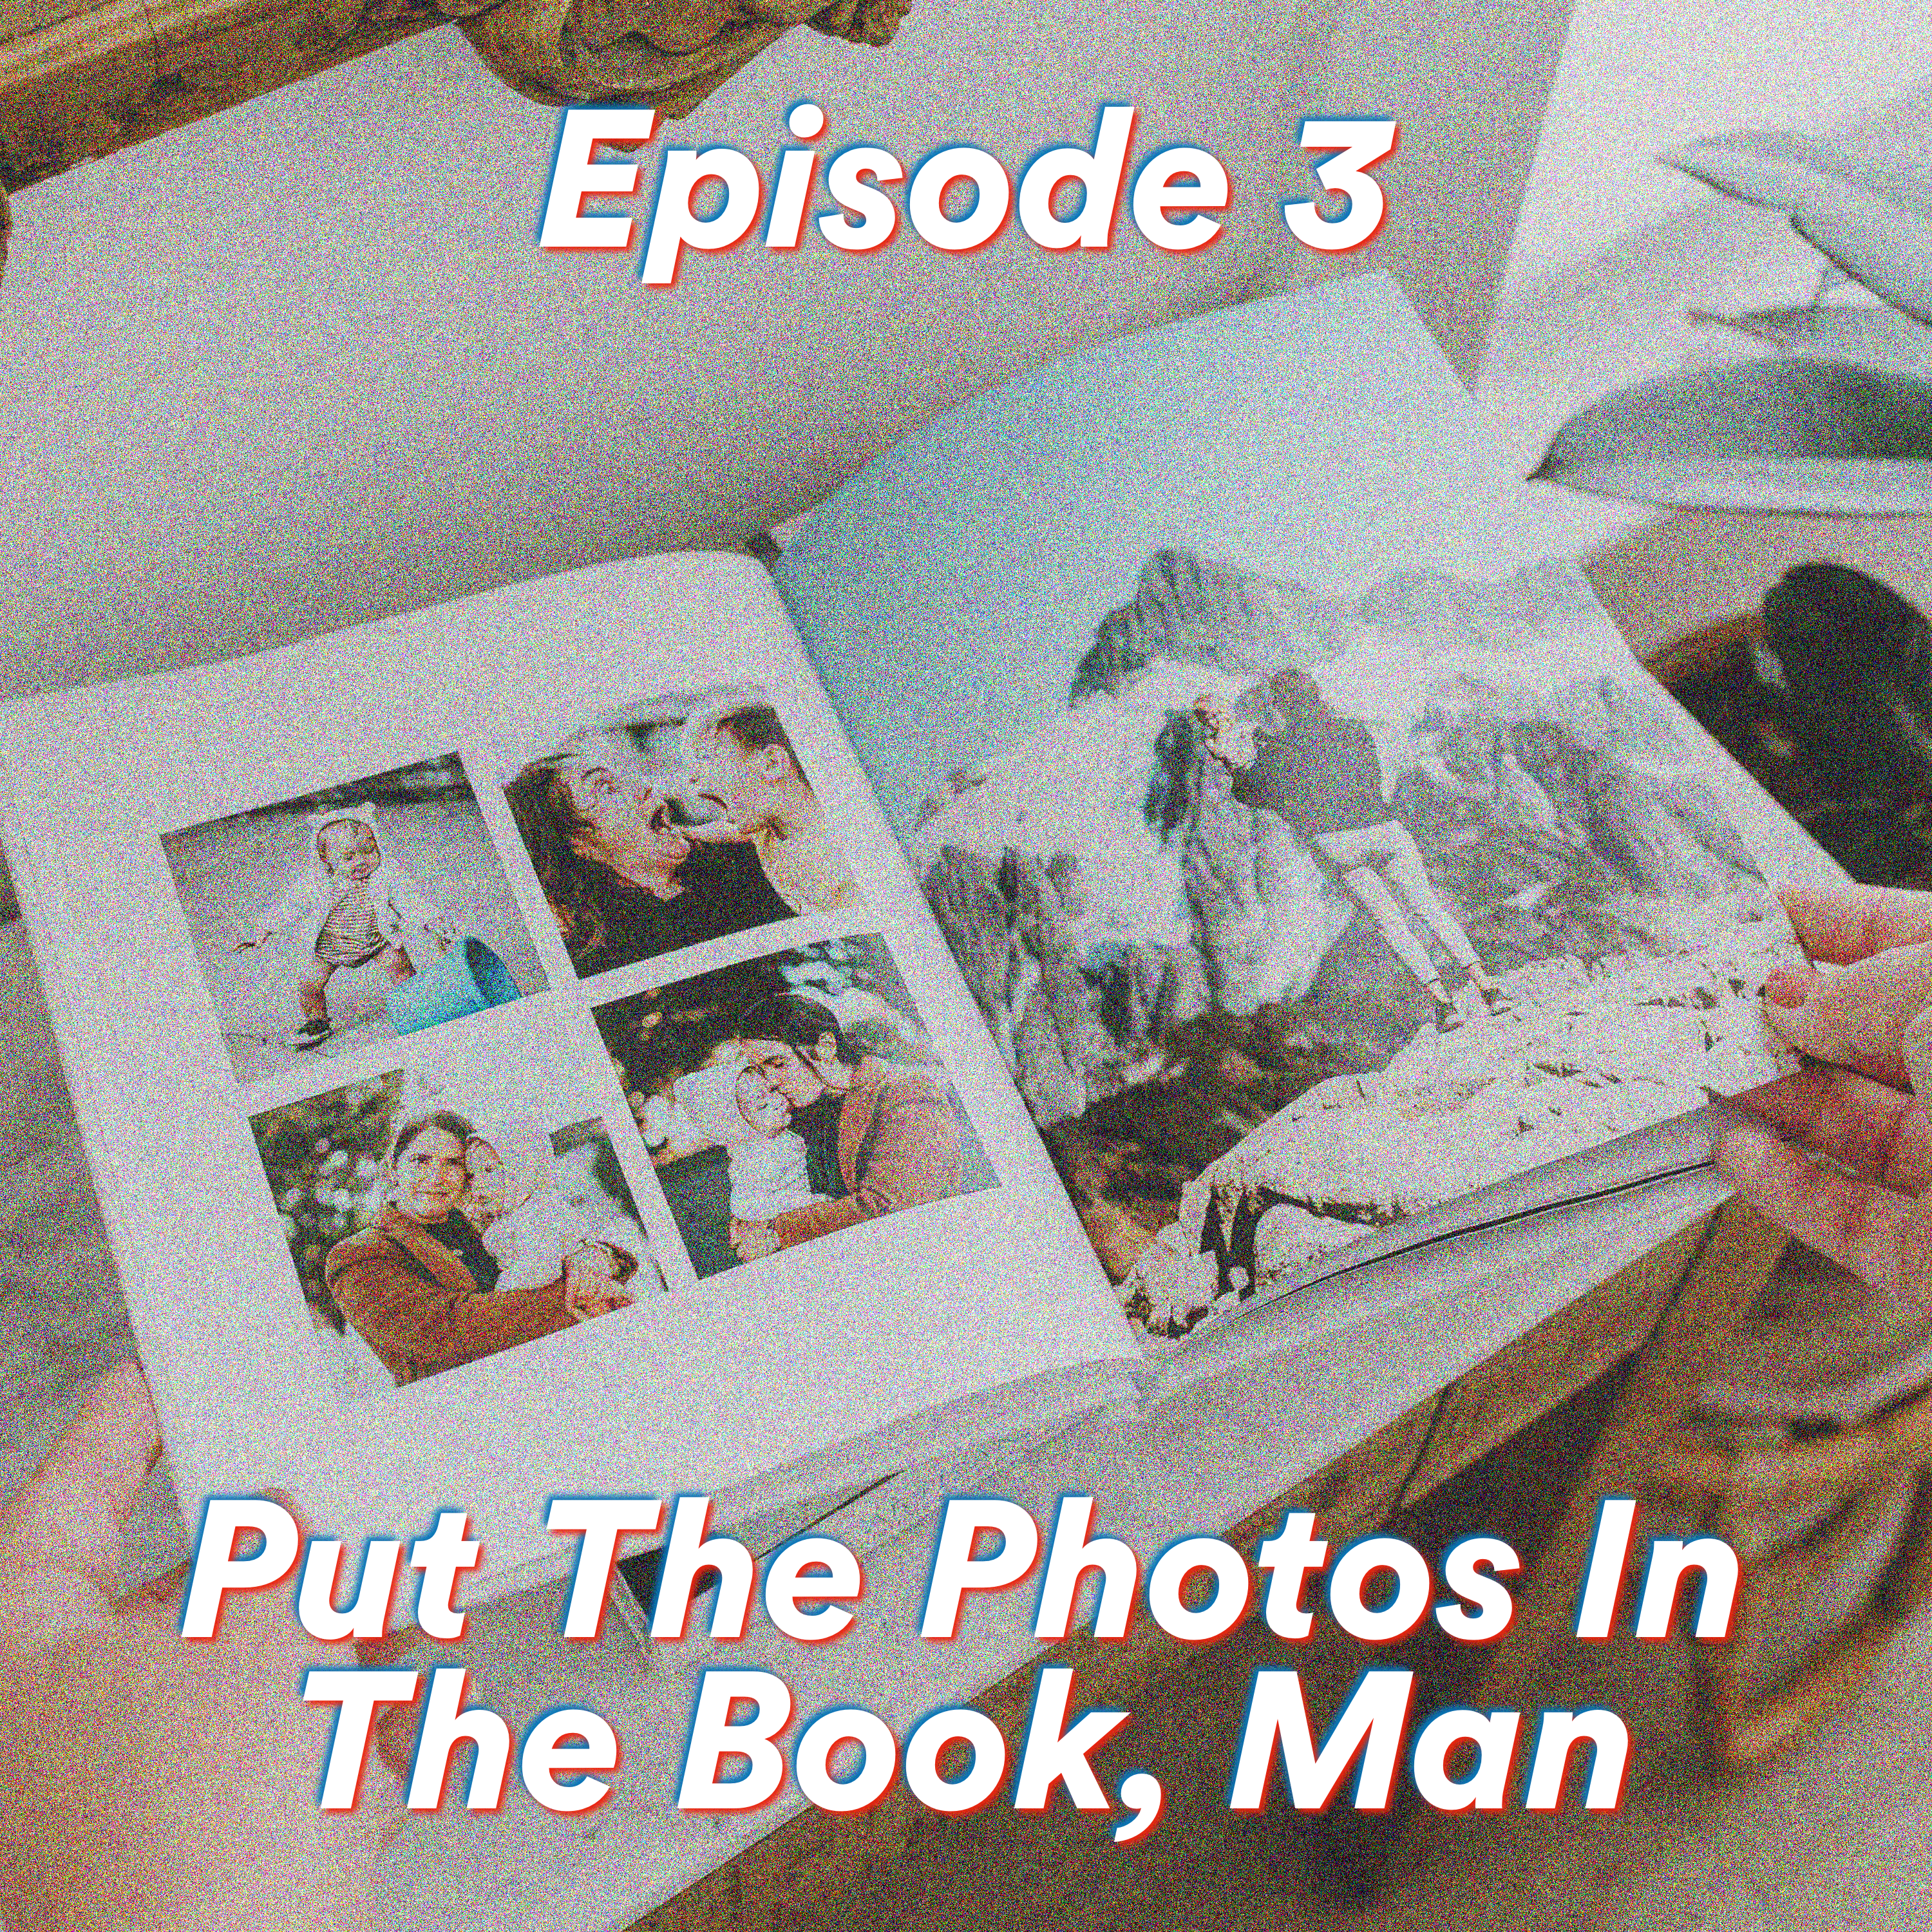 Episode 3: Put the Photos in the Book, Man